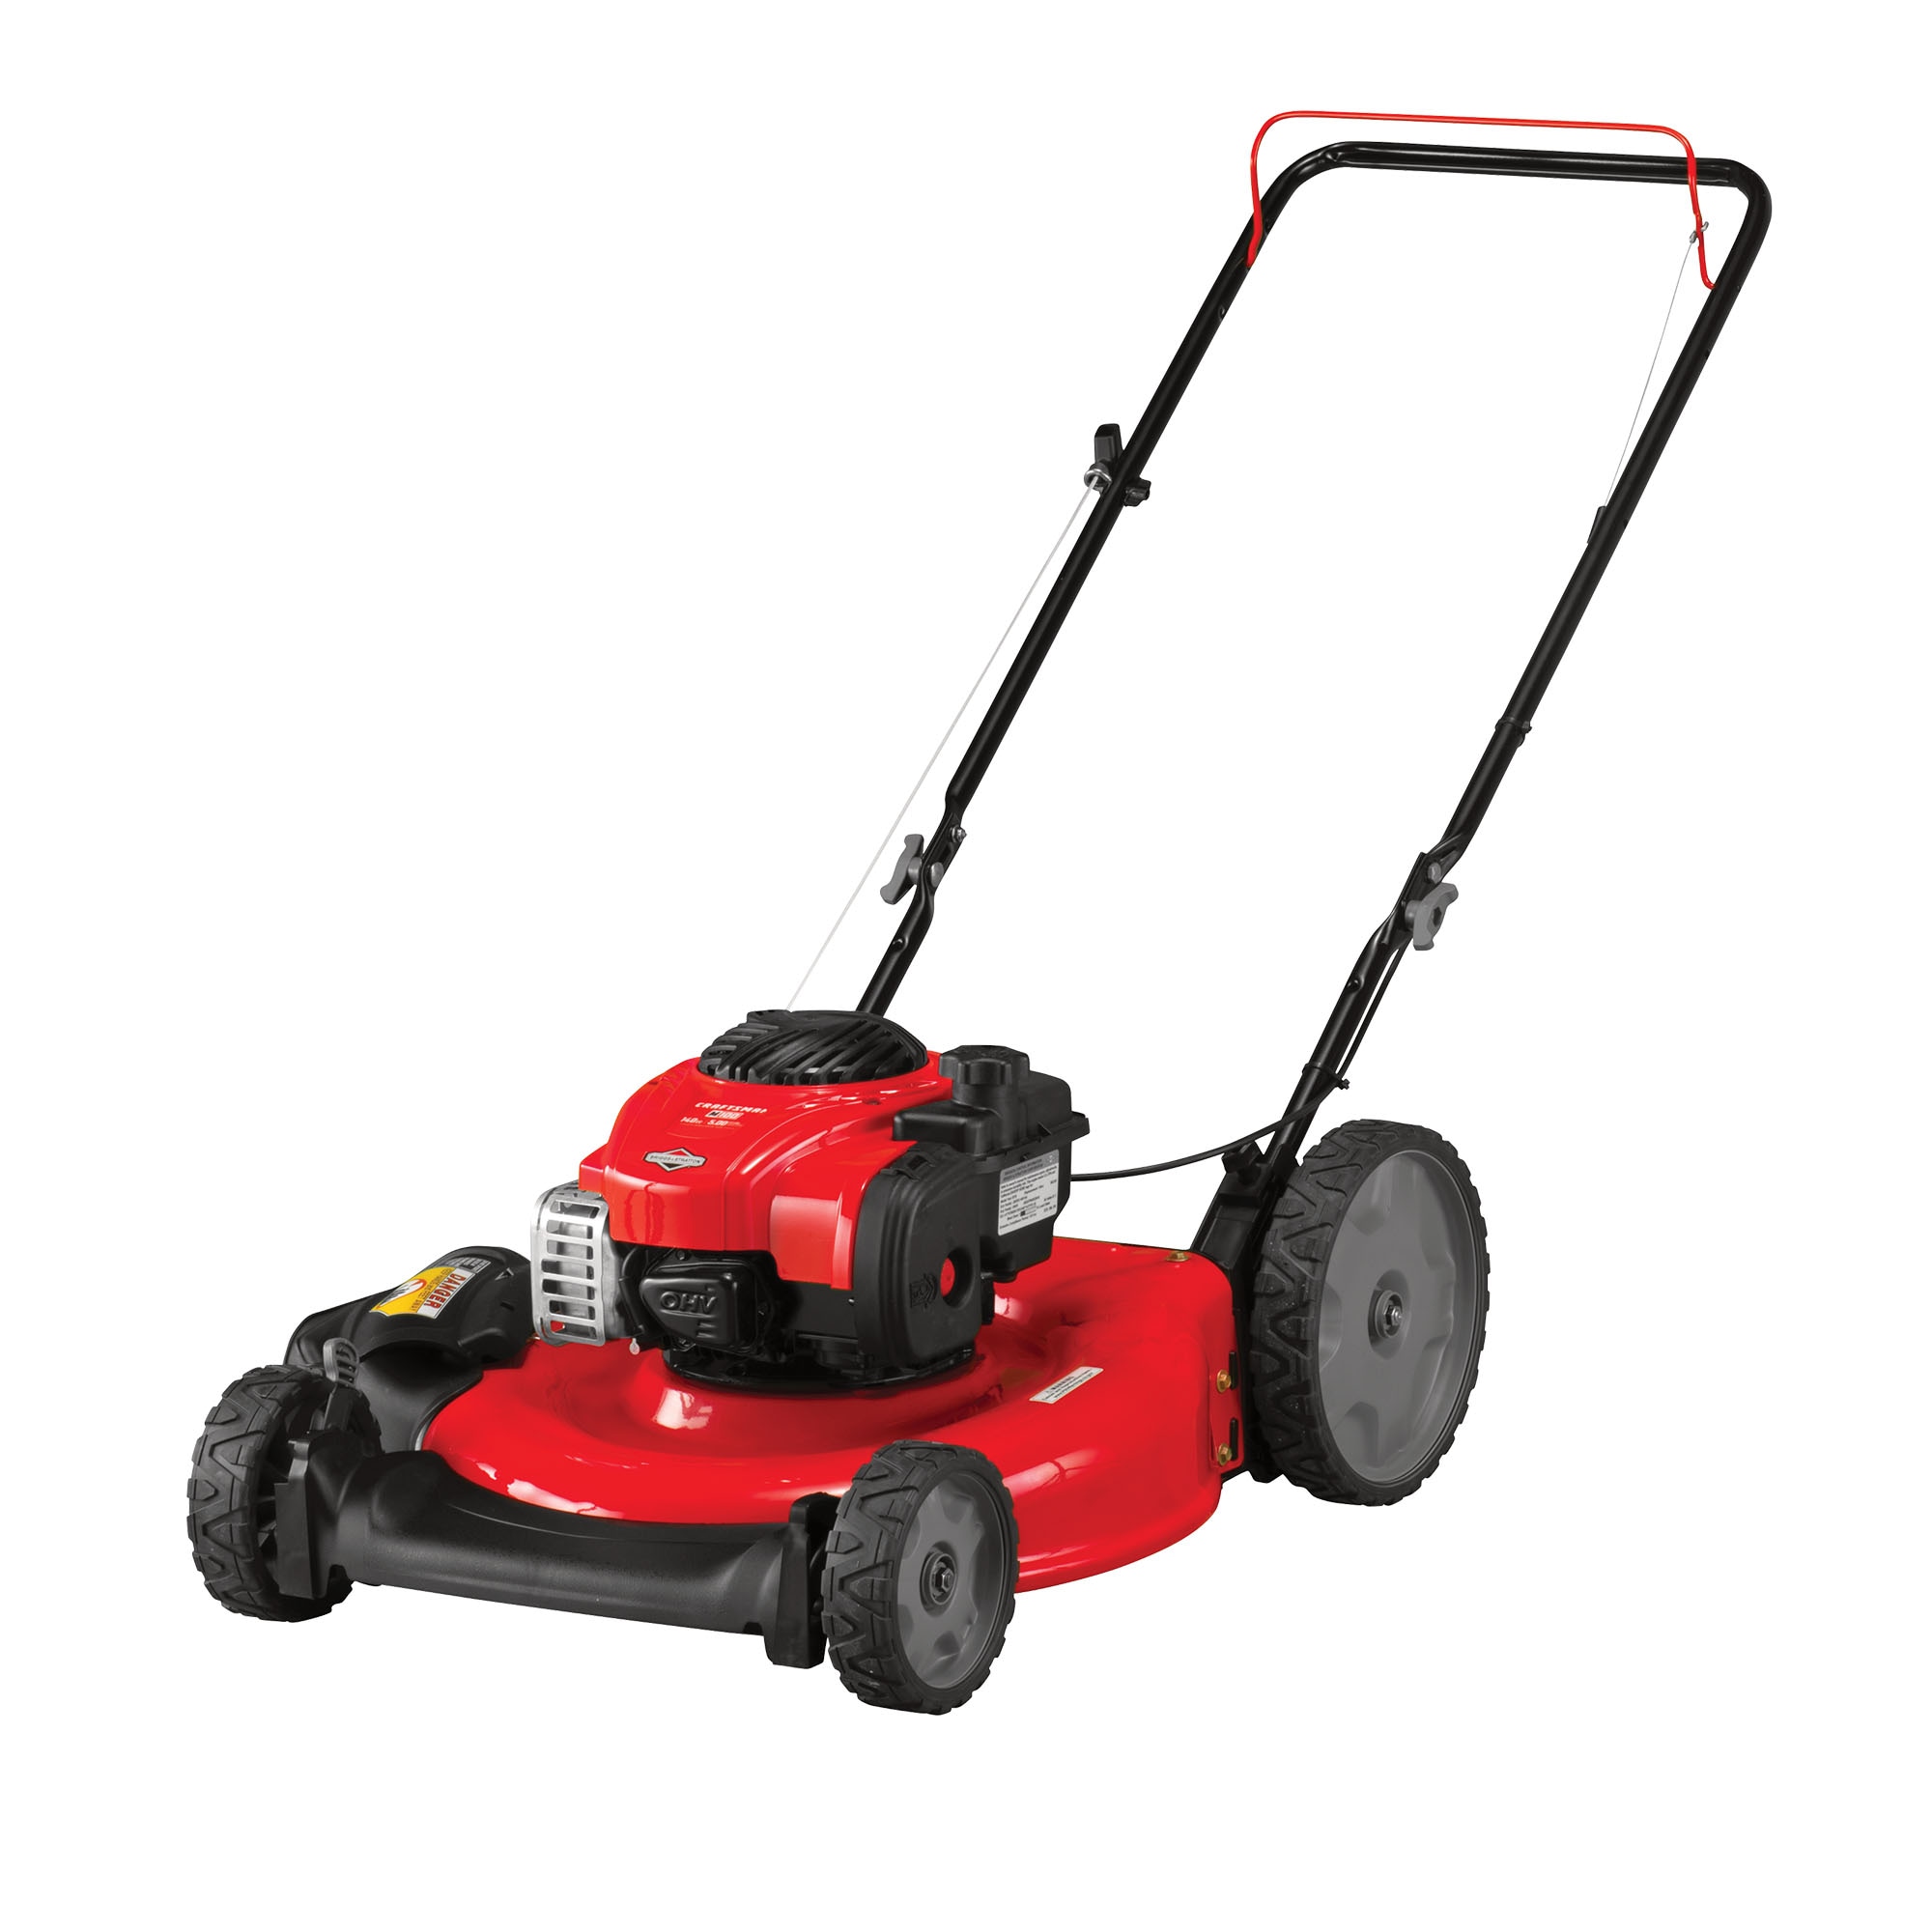 CRAFTSMAN M100 21-in Gas Push Lawn Mower with 140-cc Briggs and